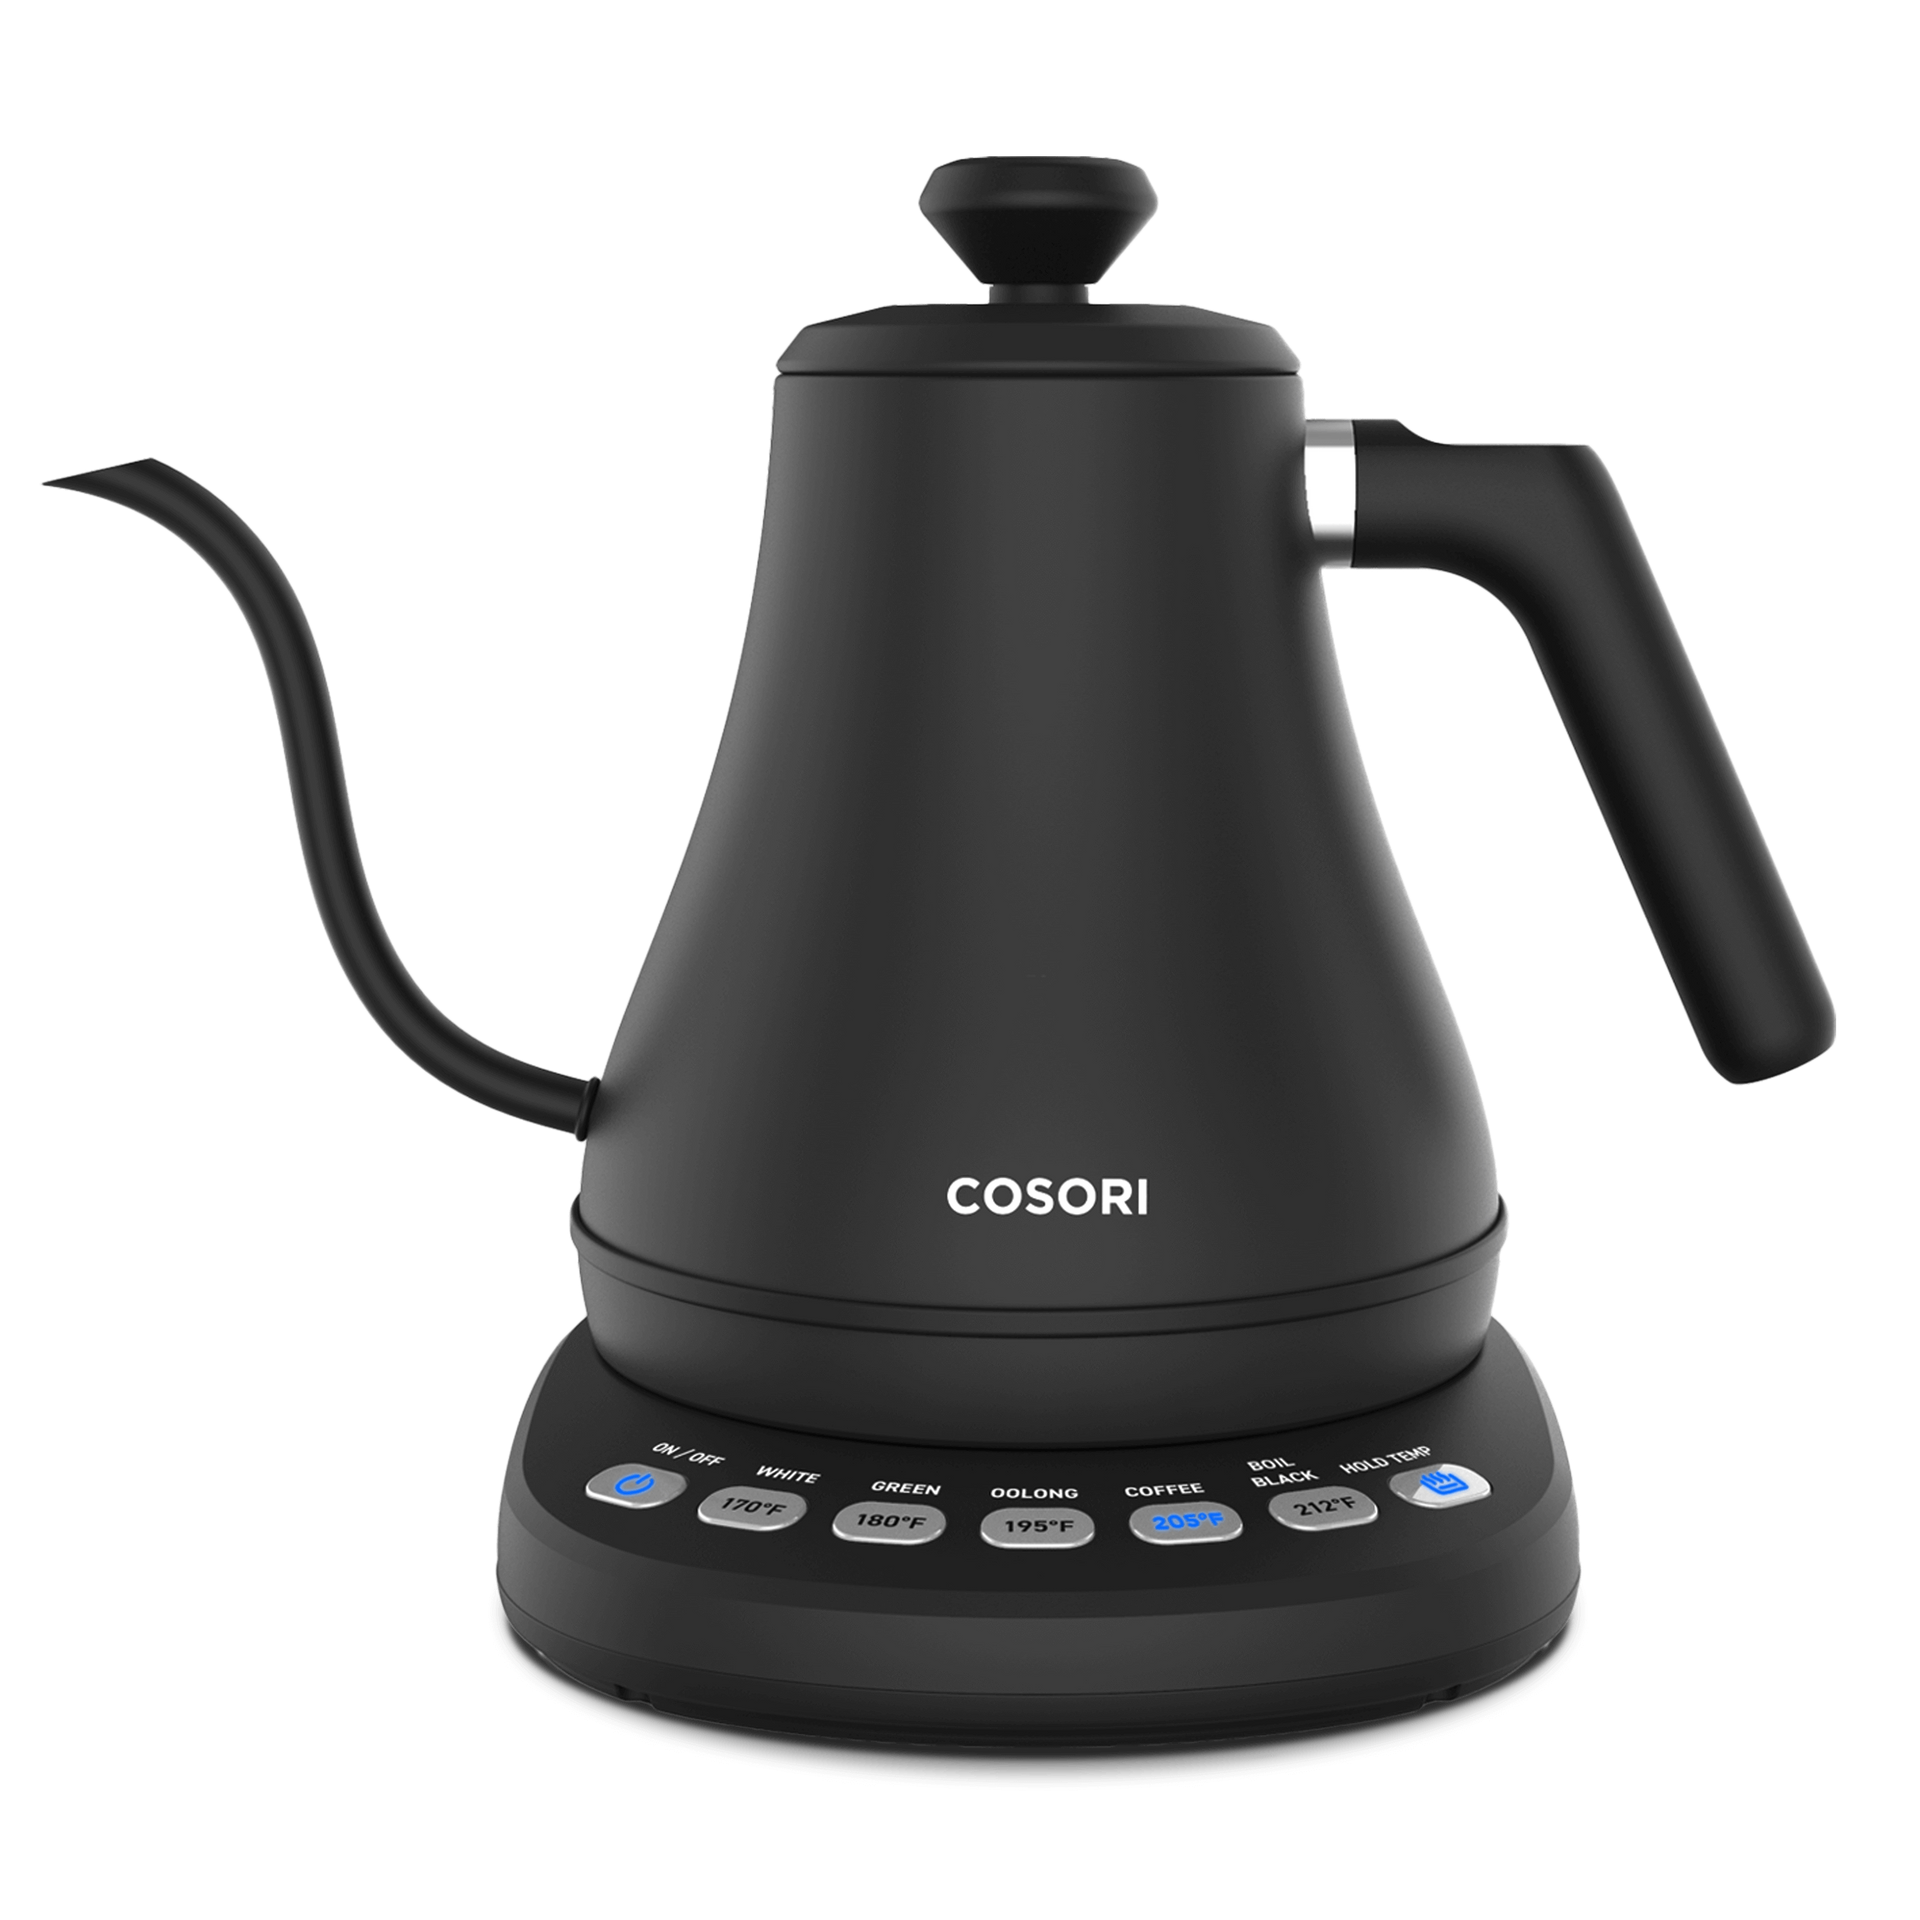 Electric kettle with temperature buttons that also start the boil : r/tea